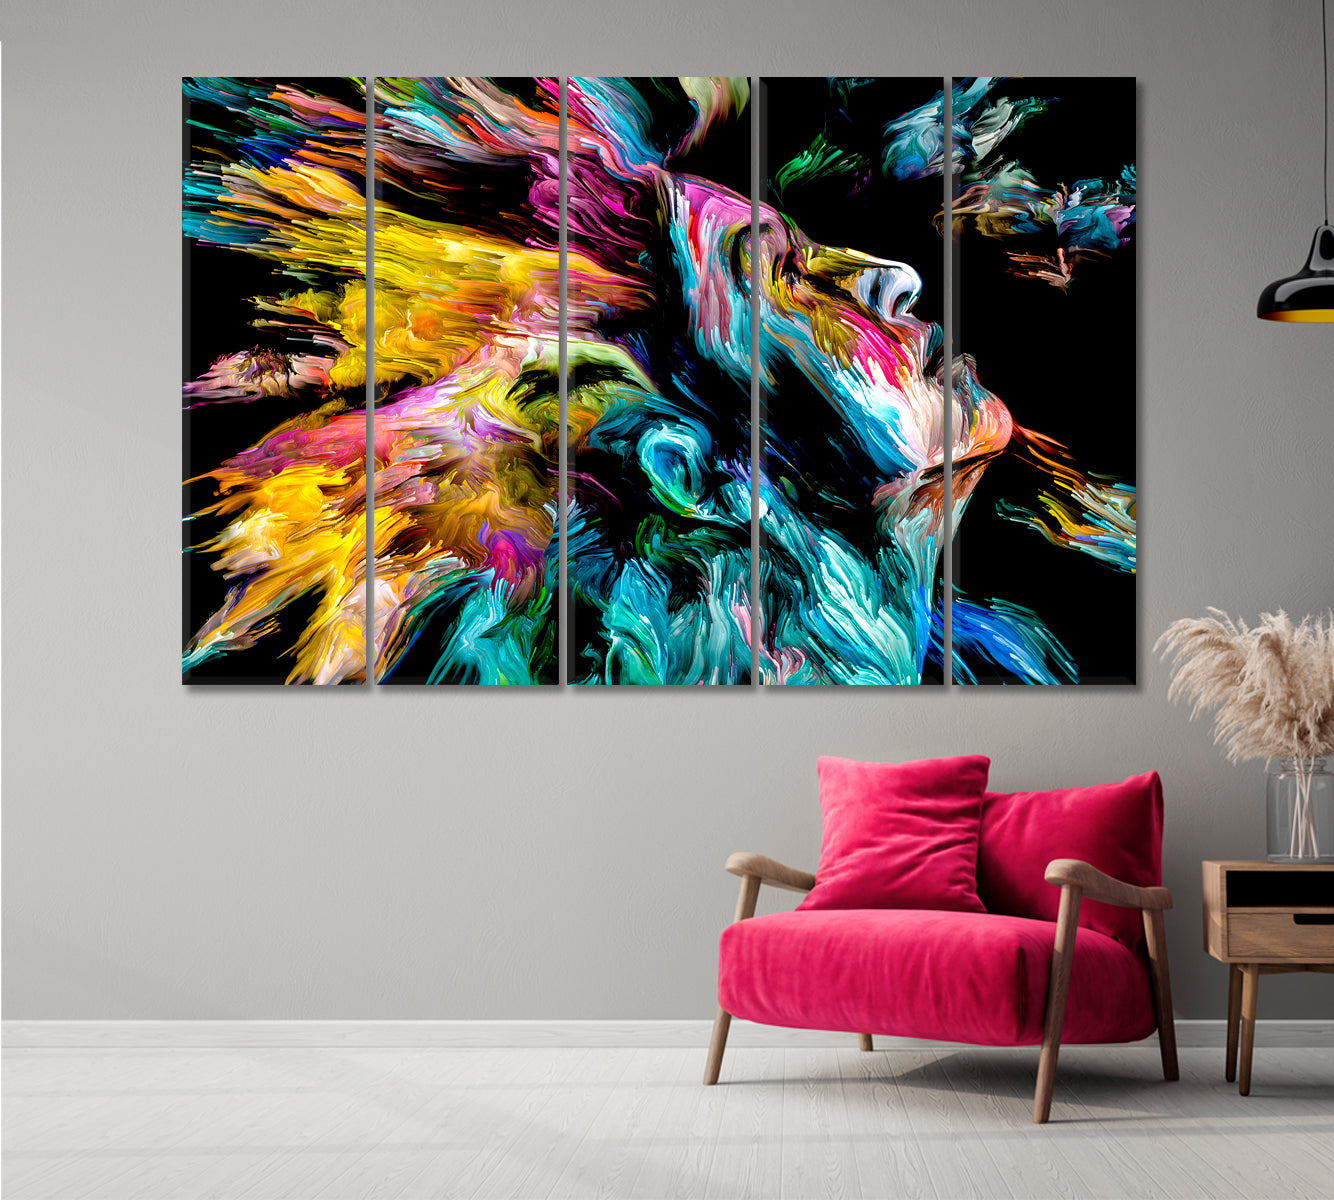 WOMAN AND COLORS EXPLOSION Abstract Modern Art Portrait Contemporary Art Artesty 5 panels 36" x 24" 